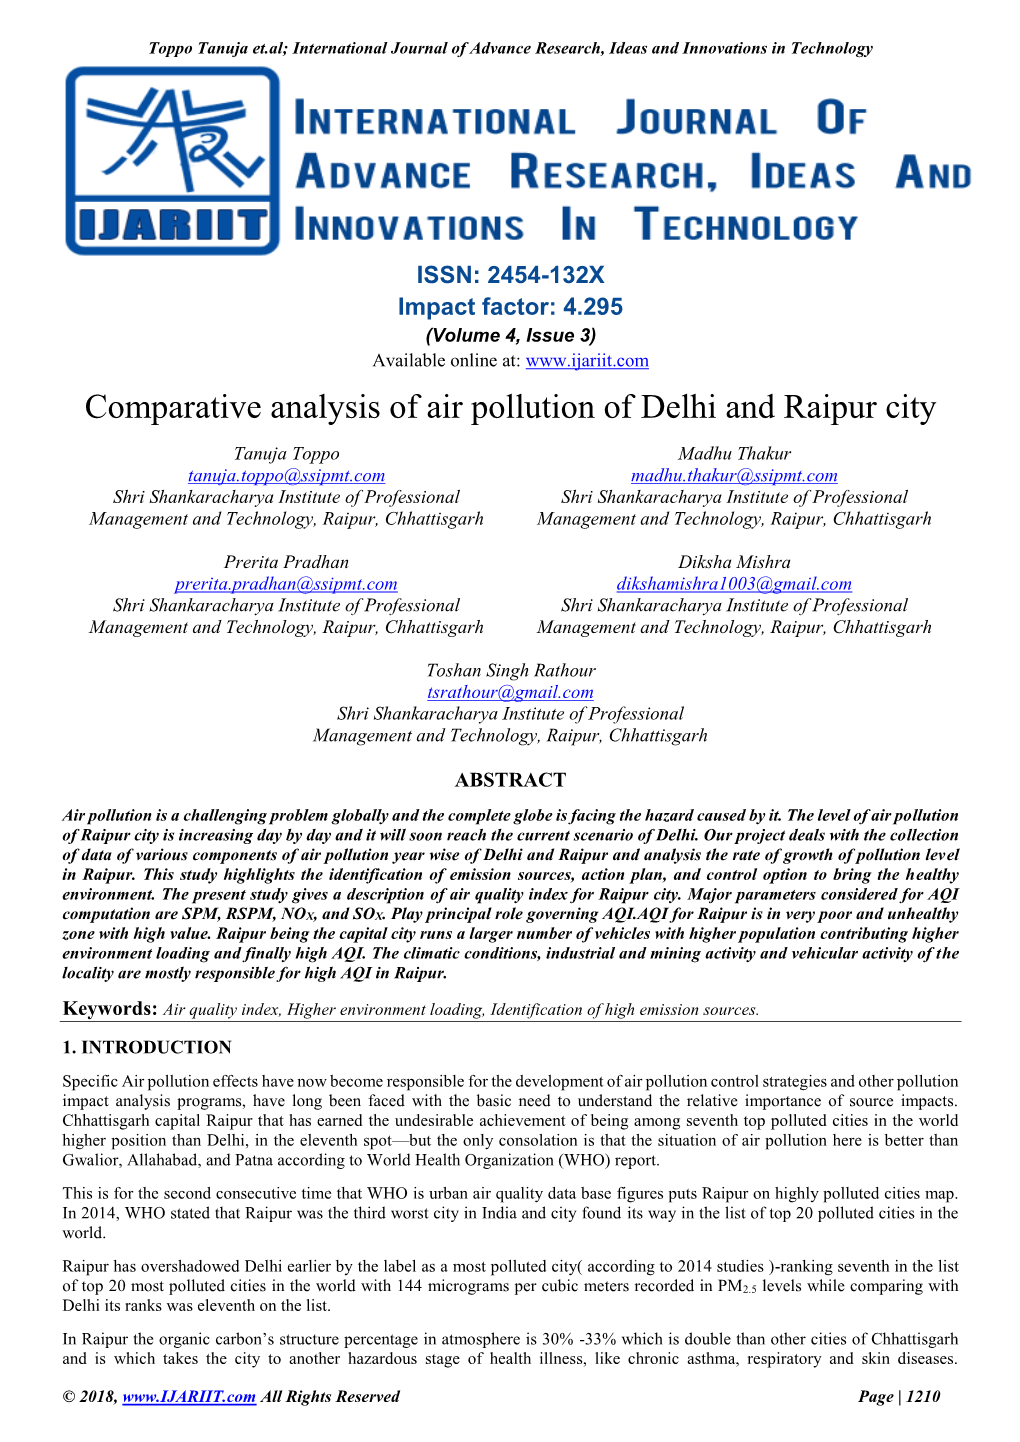 Comparative Analysis of Air Pollution of Delhi and Raipur City